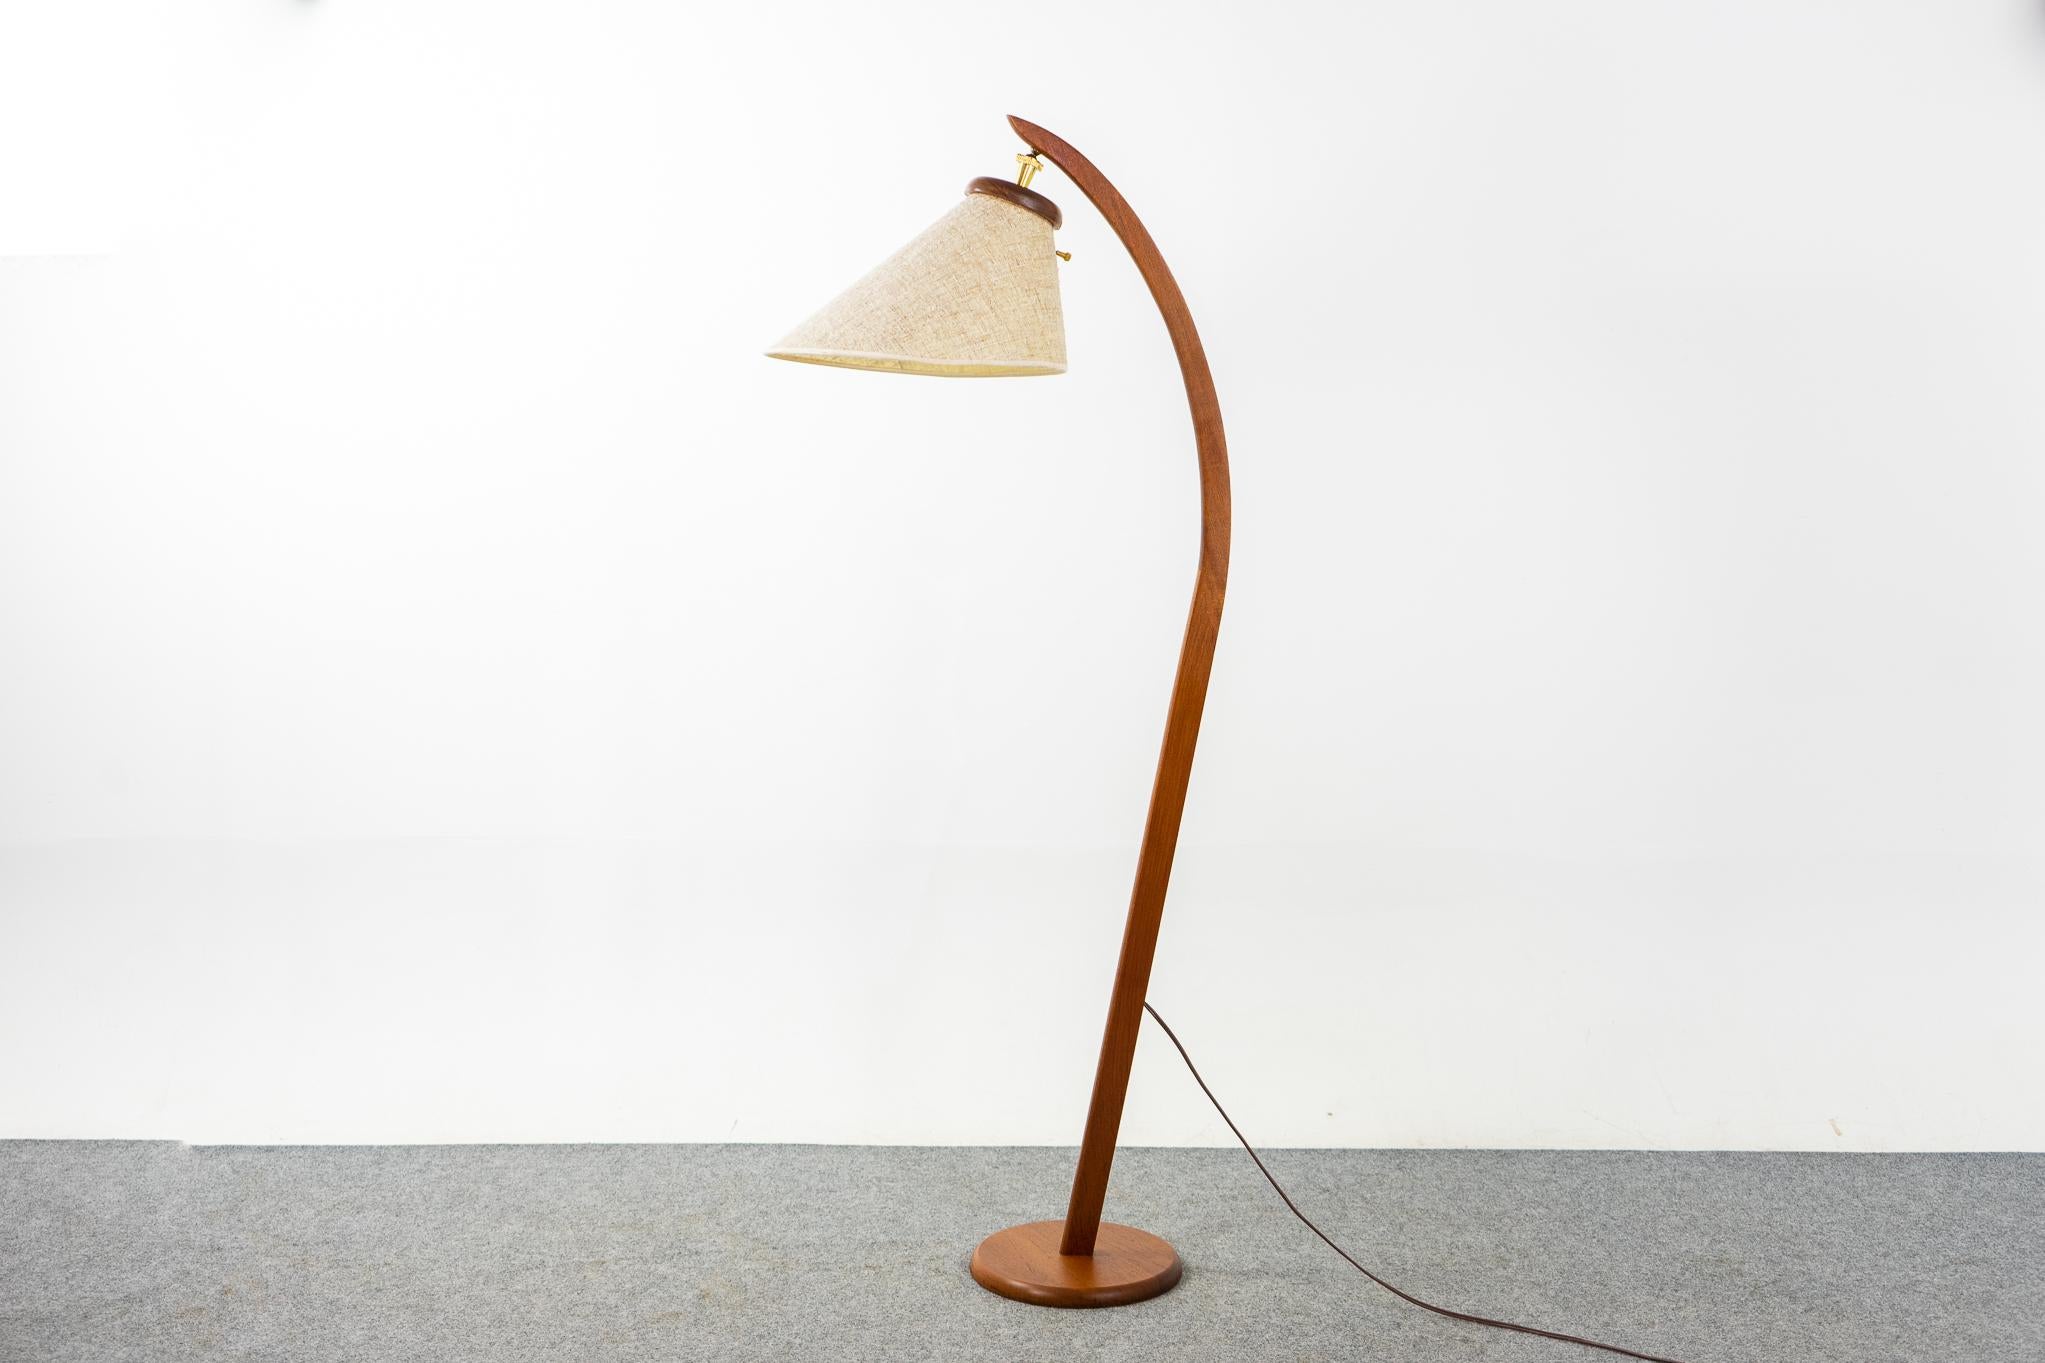 Teak arc floor lamp, circa 1960's. Sought after sleek, graceful solid teak lamp with original textured Dutch bonnet adjustable shade, pivot the position to suit your needs! Tri-light socket offers 3 lighting settings. Back of shade shows minor